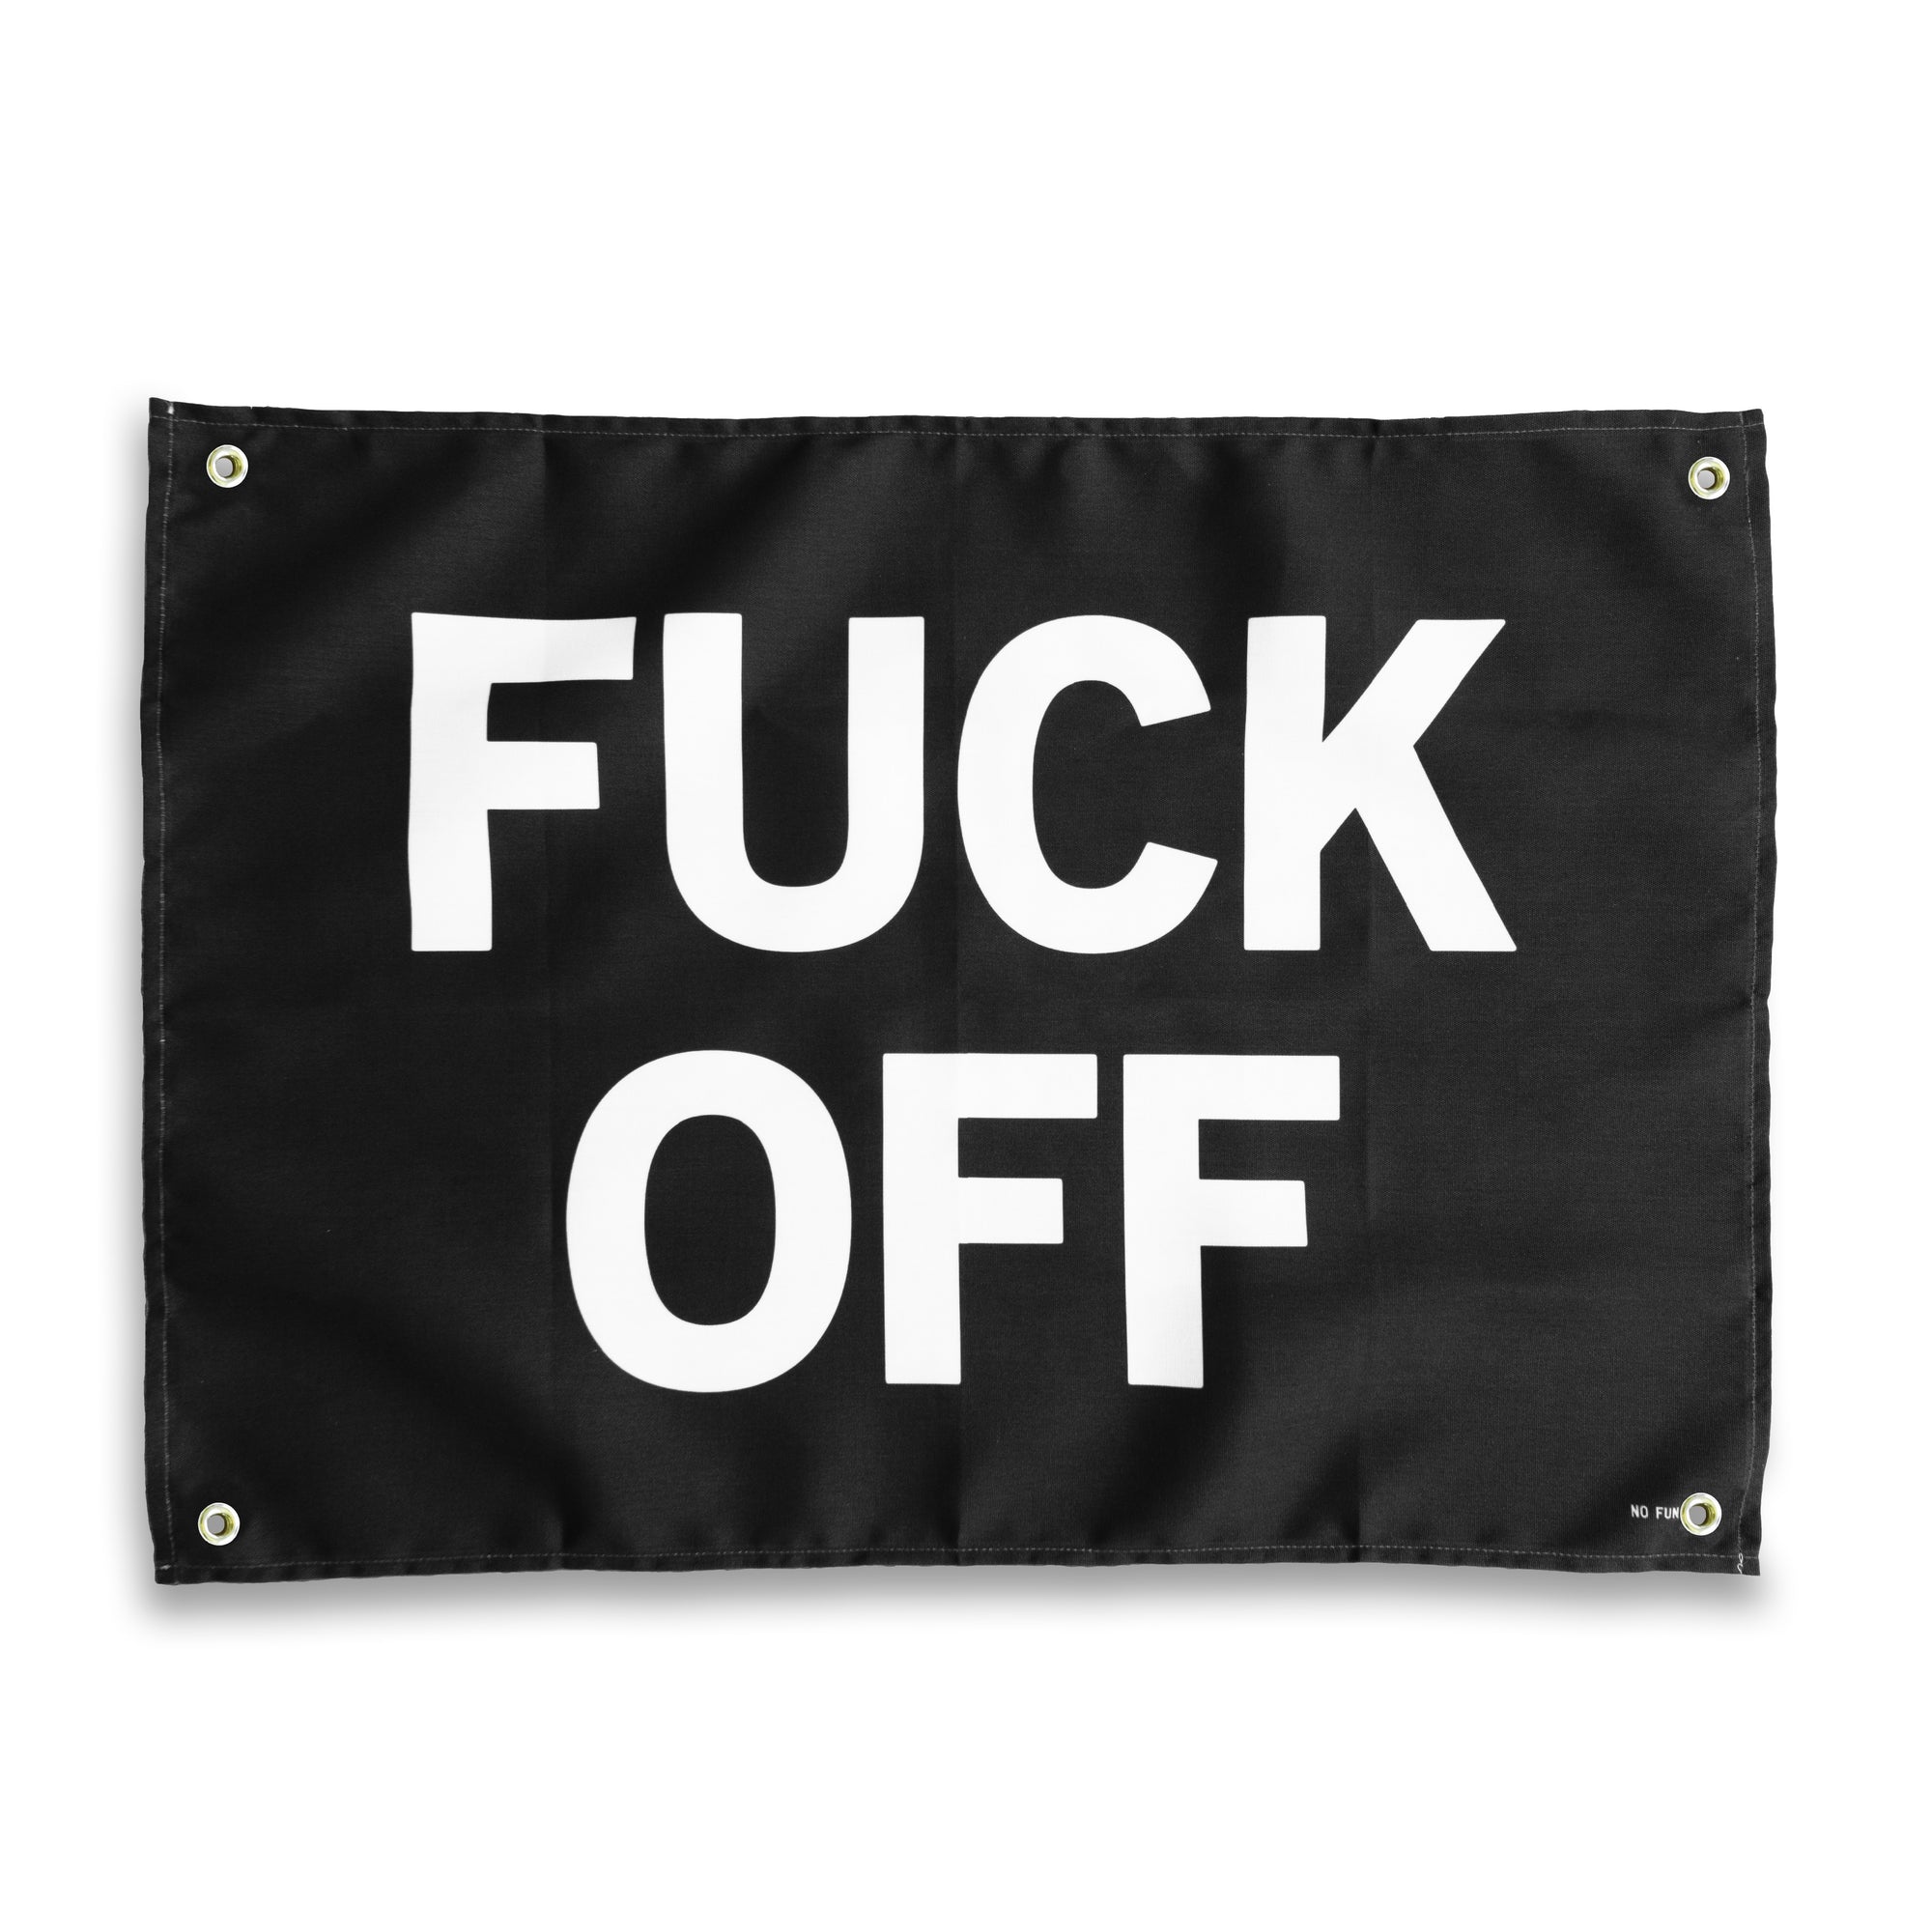 The "Fuck Off" Wall Tapestry by No Fun®.  Tapestry is black, with the phrase "FUCK OFF" printed in large white letters.  There is a small "No Fun®" logo in the bottom right hand corner.  There is 1 brass grommet in each corner of the tapestry.